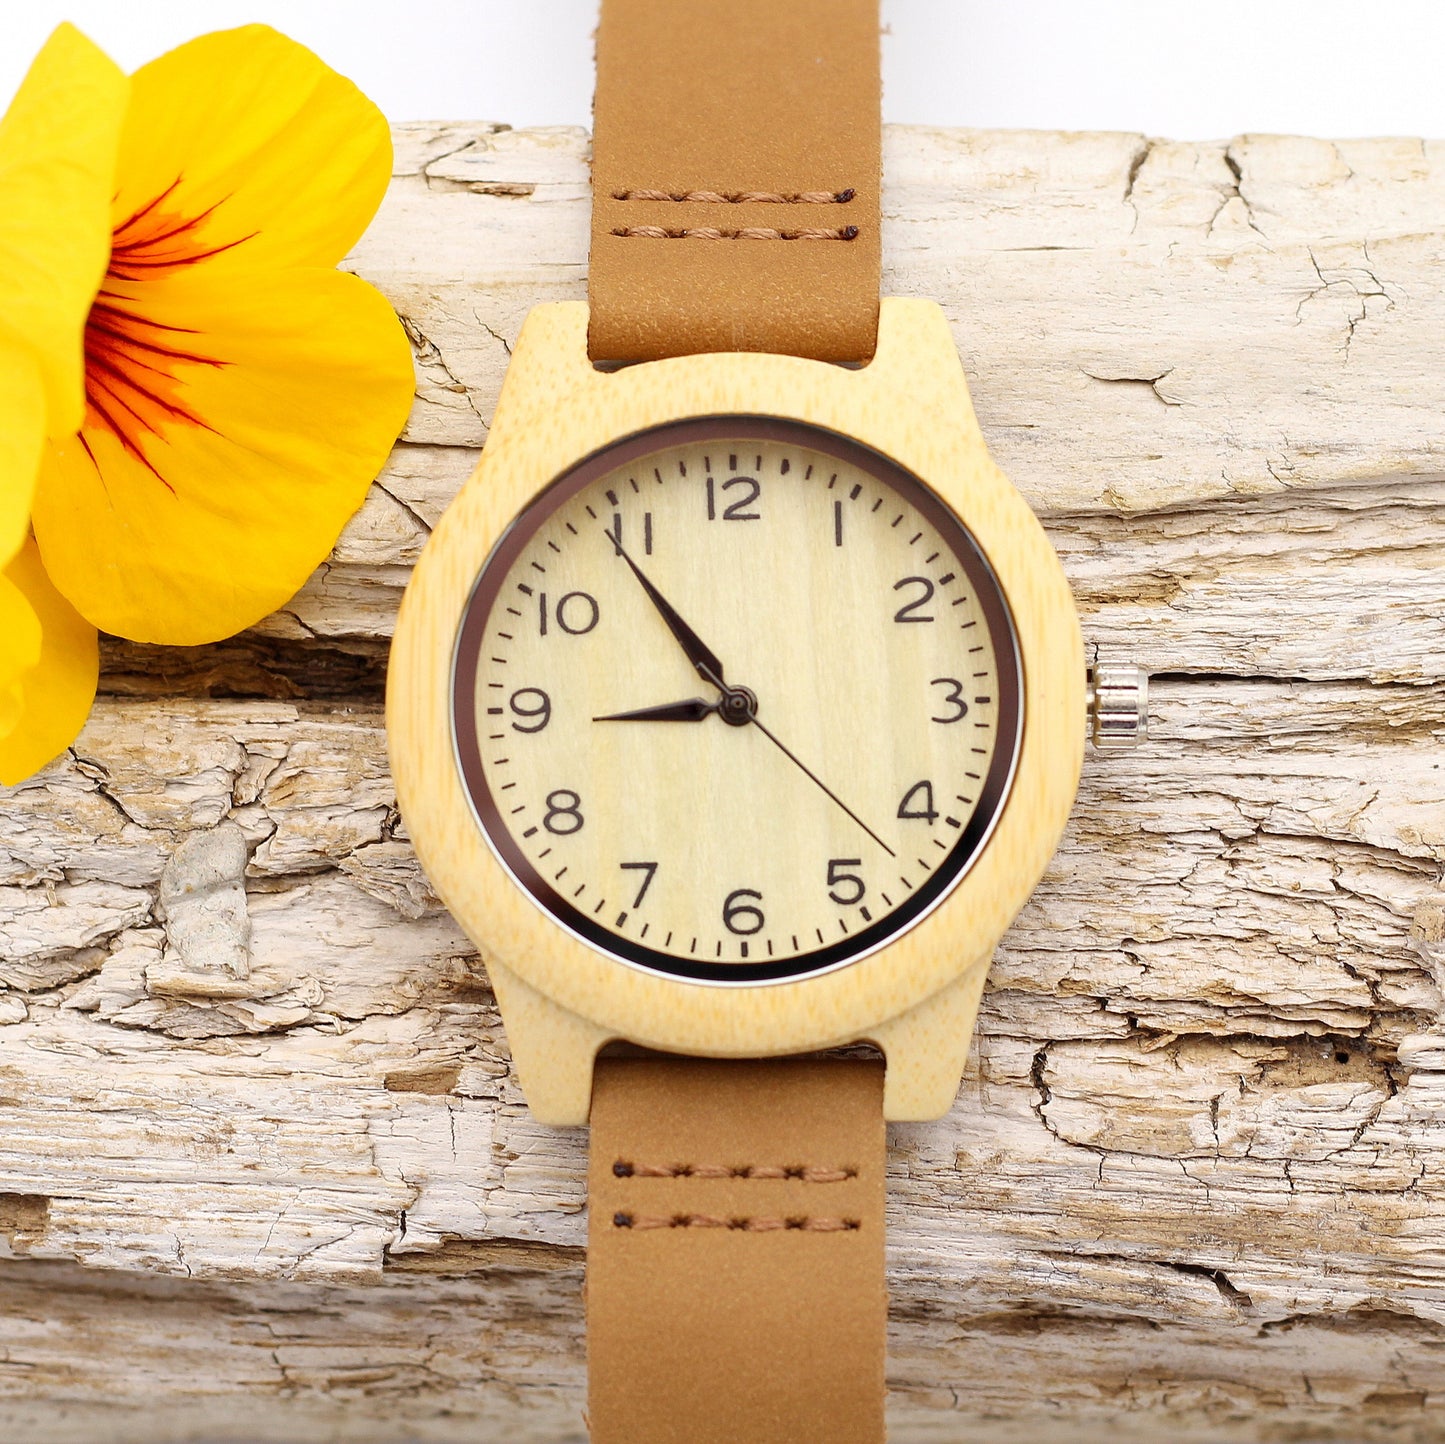 LADY GRACE Bamboo Watch with Tan Leather Strap - Hashtag Bamboo